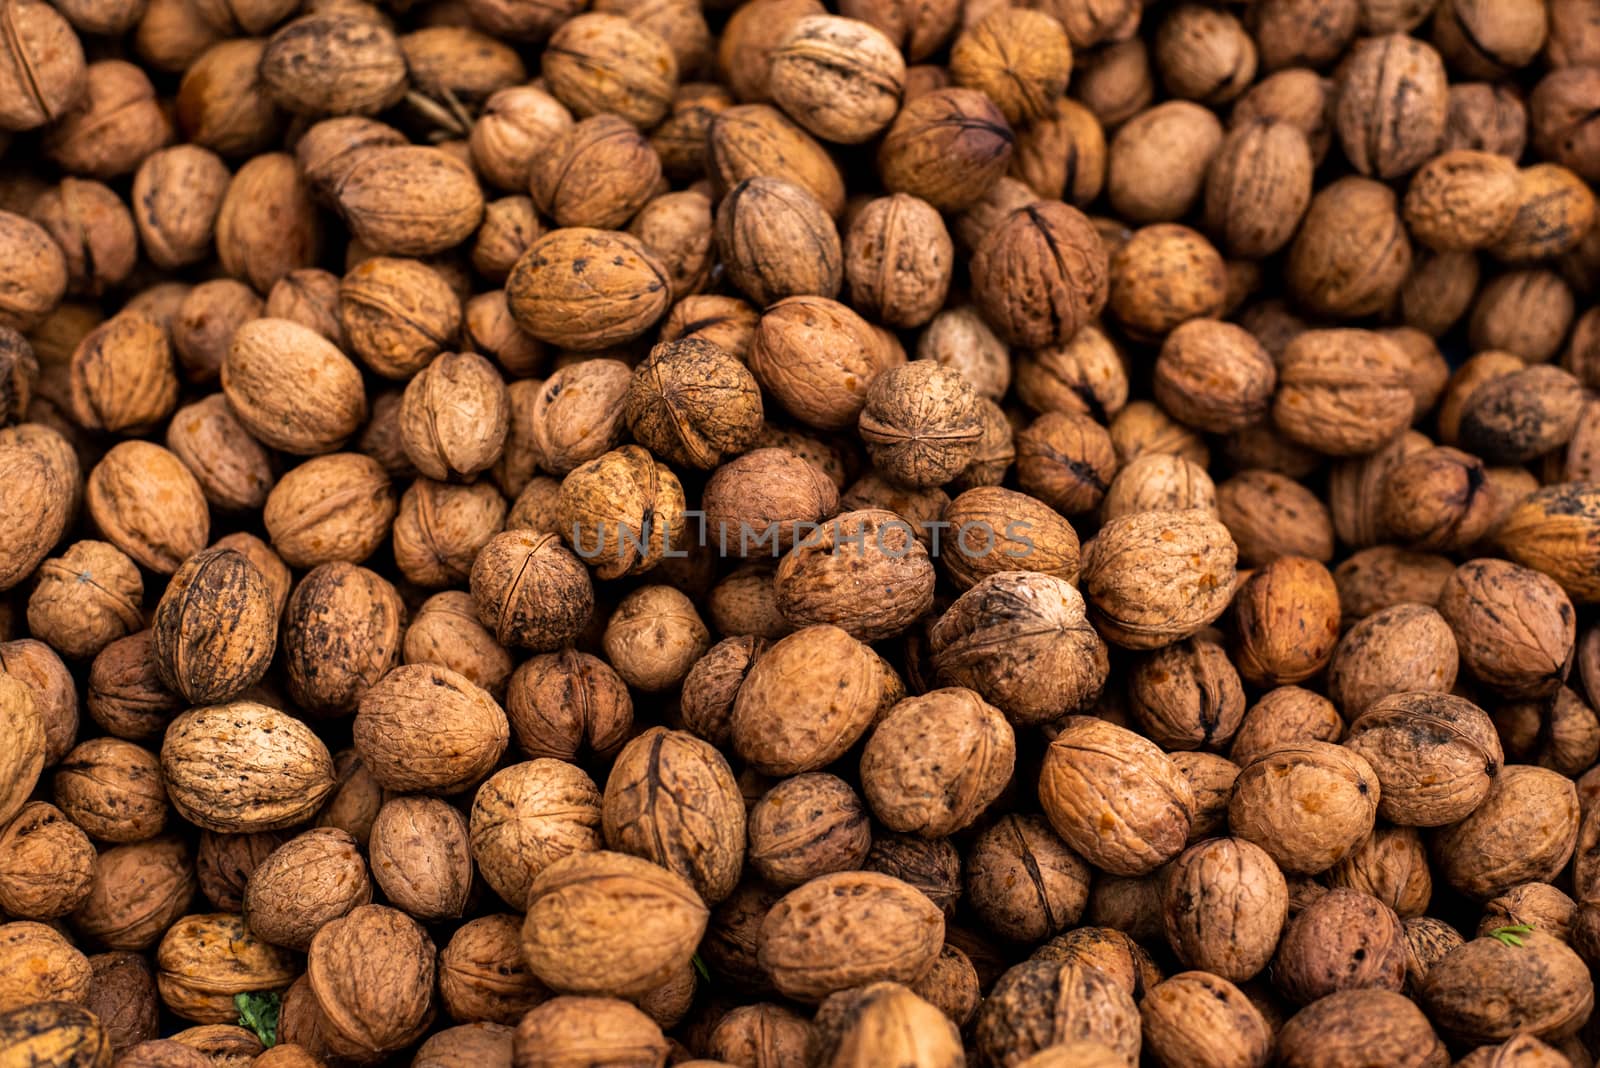 Close up of walnuts at a market by gonzalobell